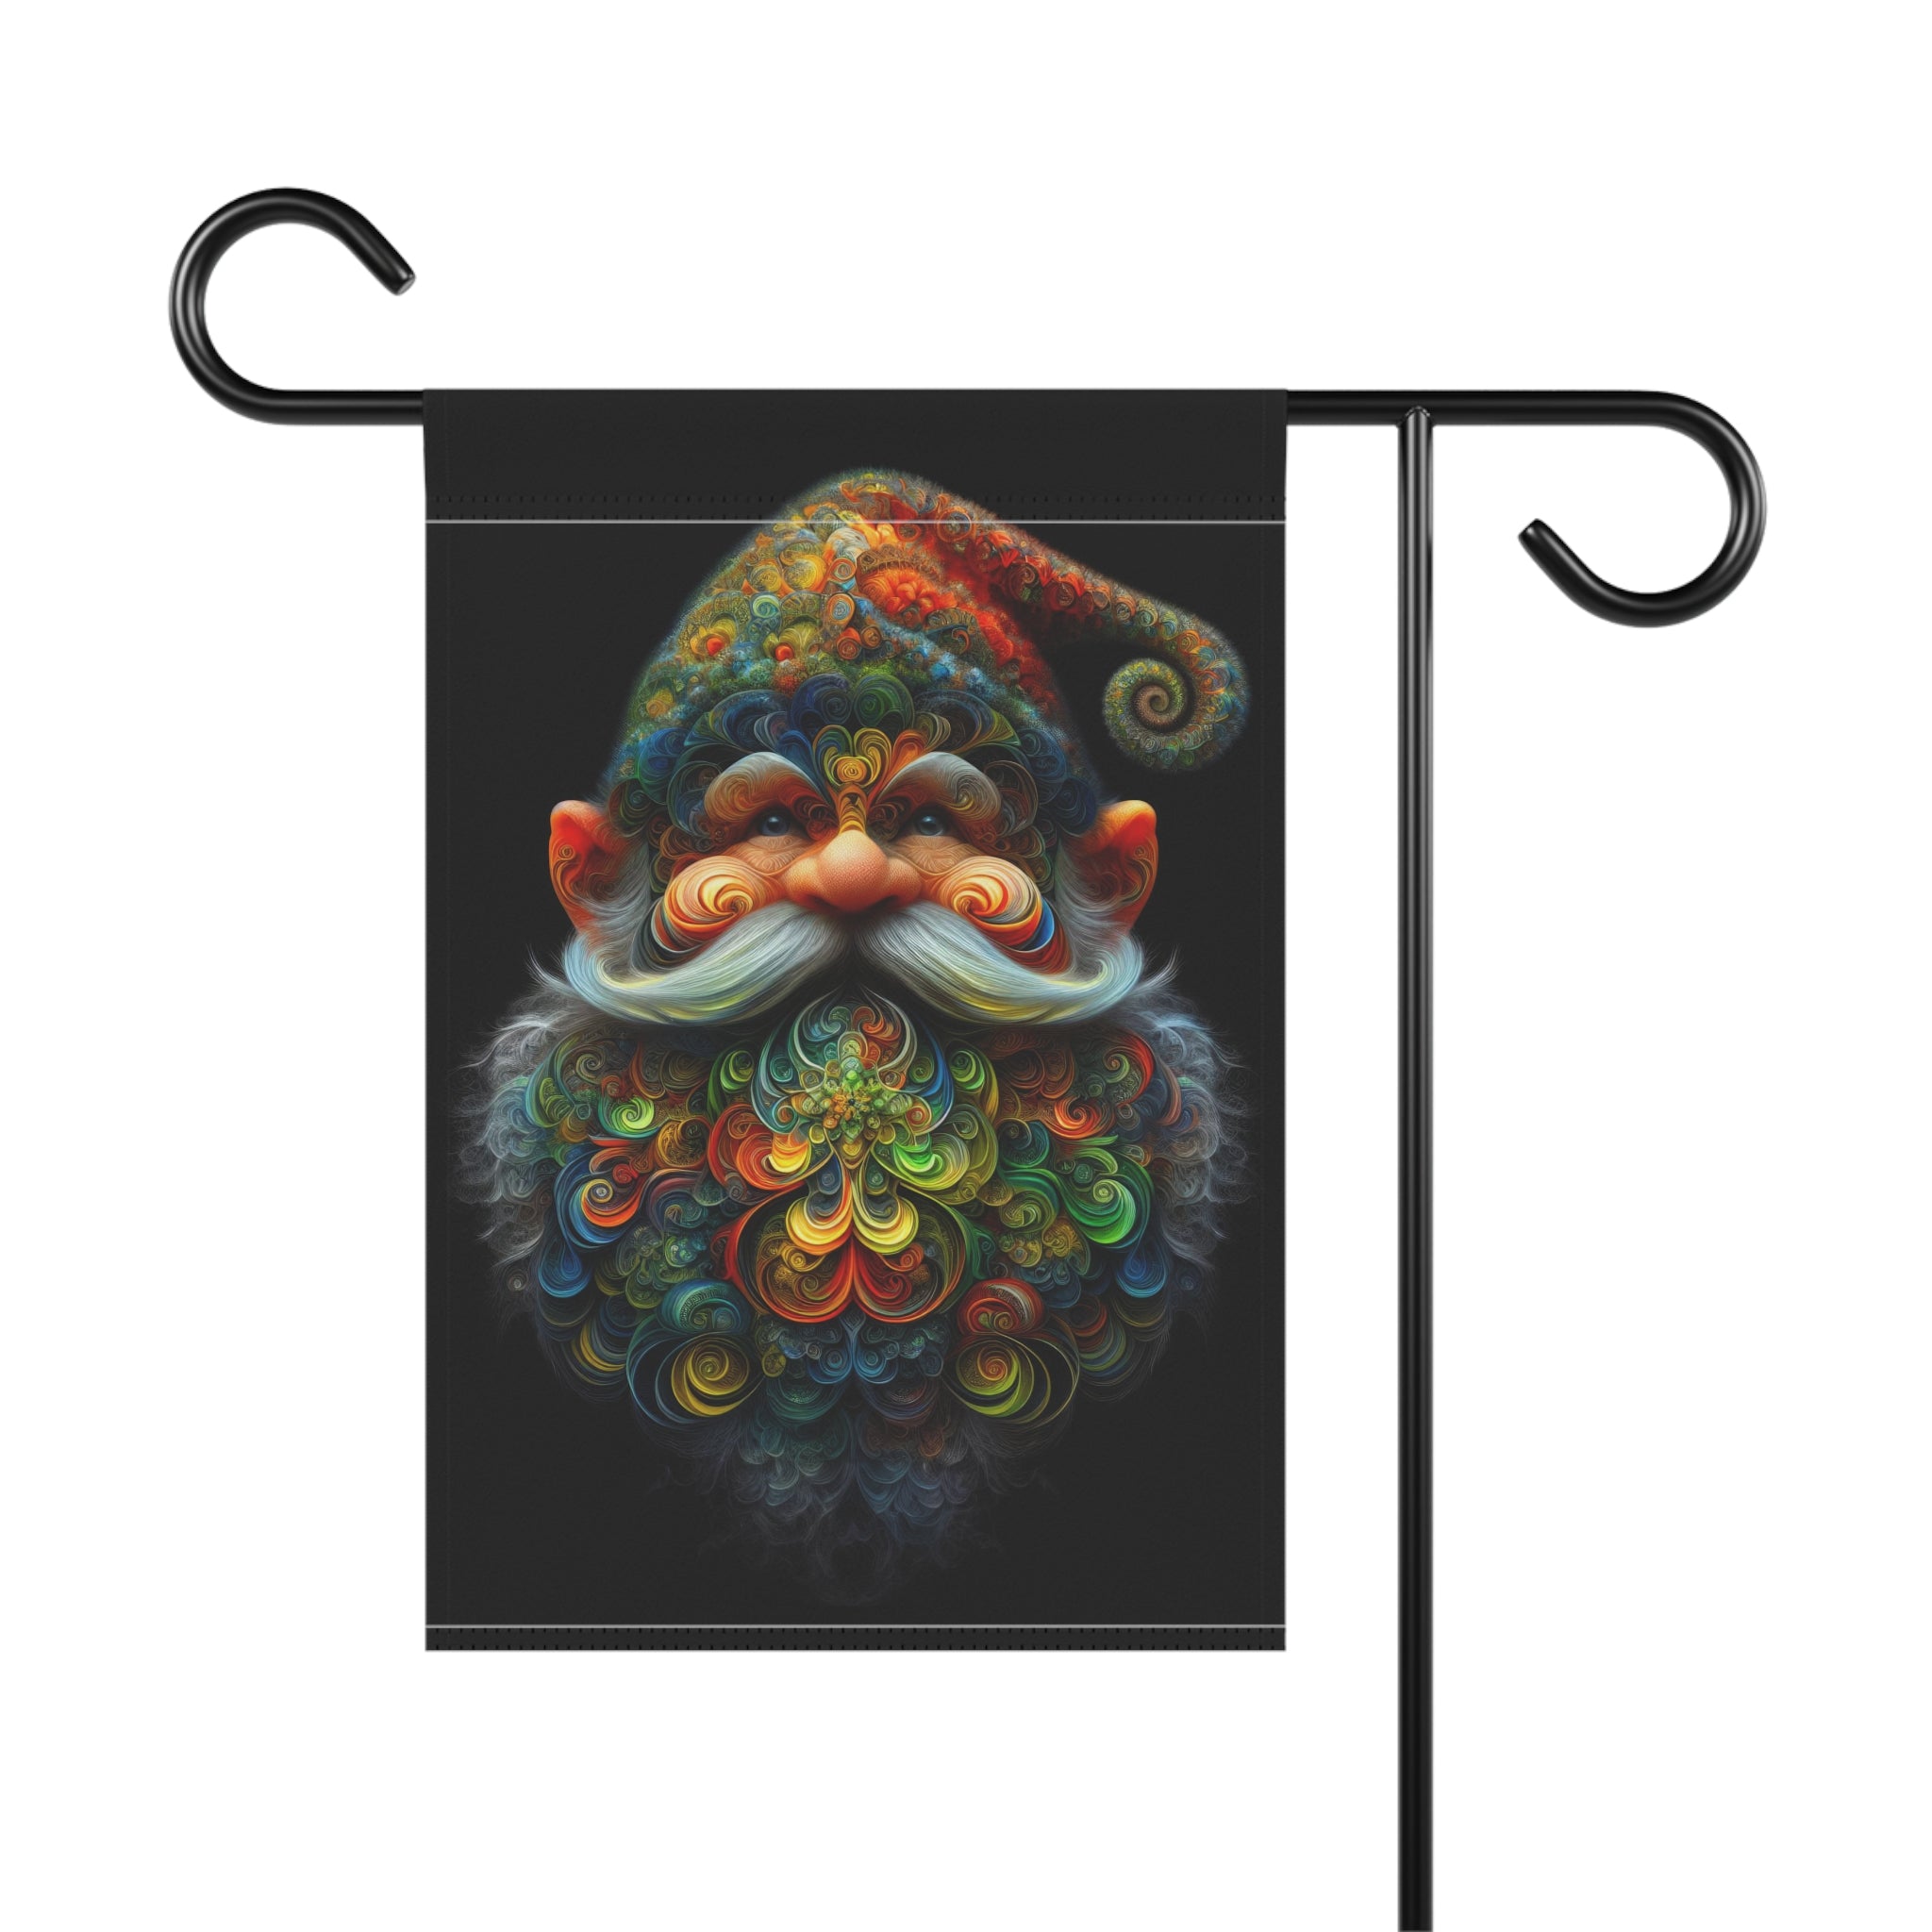 The Spirited Curlicues of Gnarly the Gnome Garden & House Banner